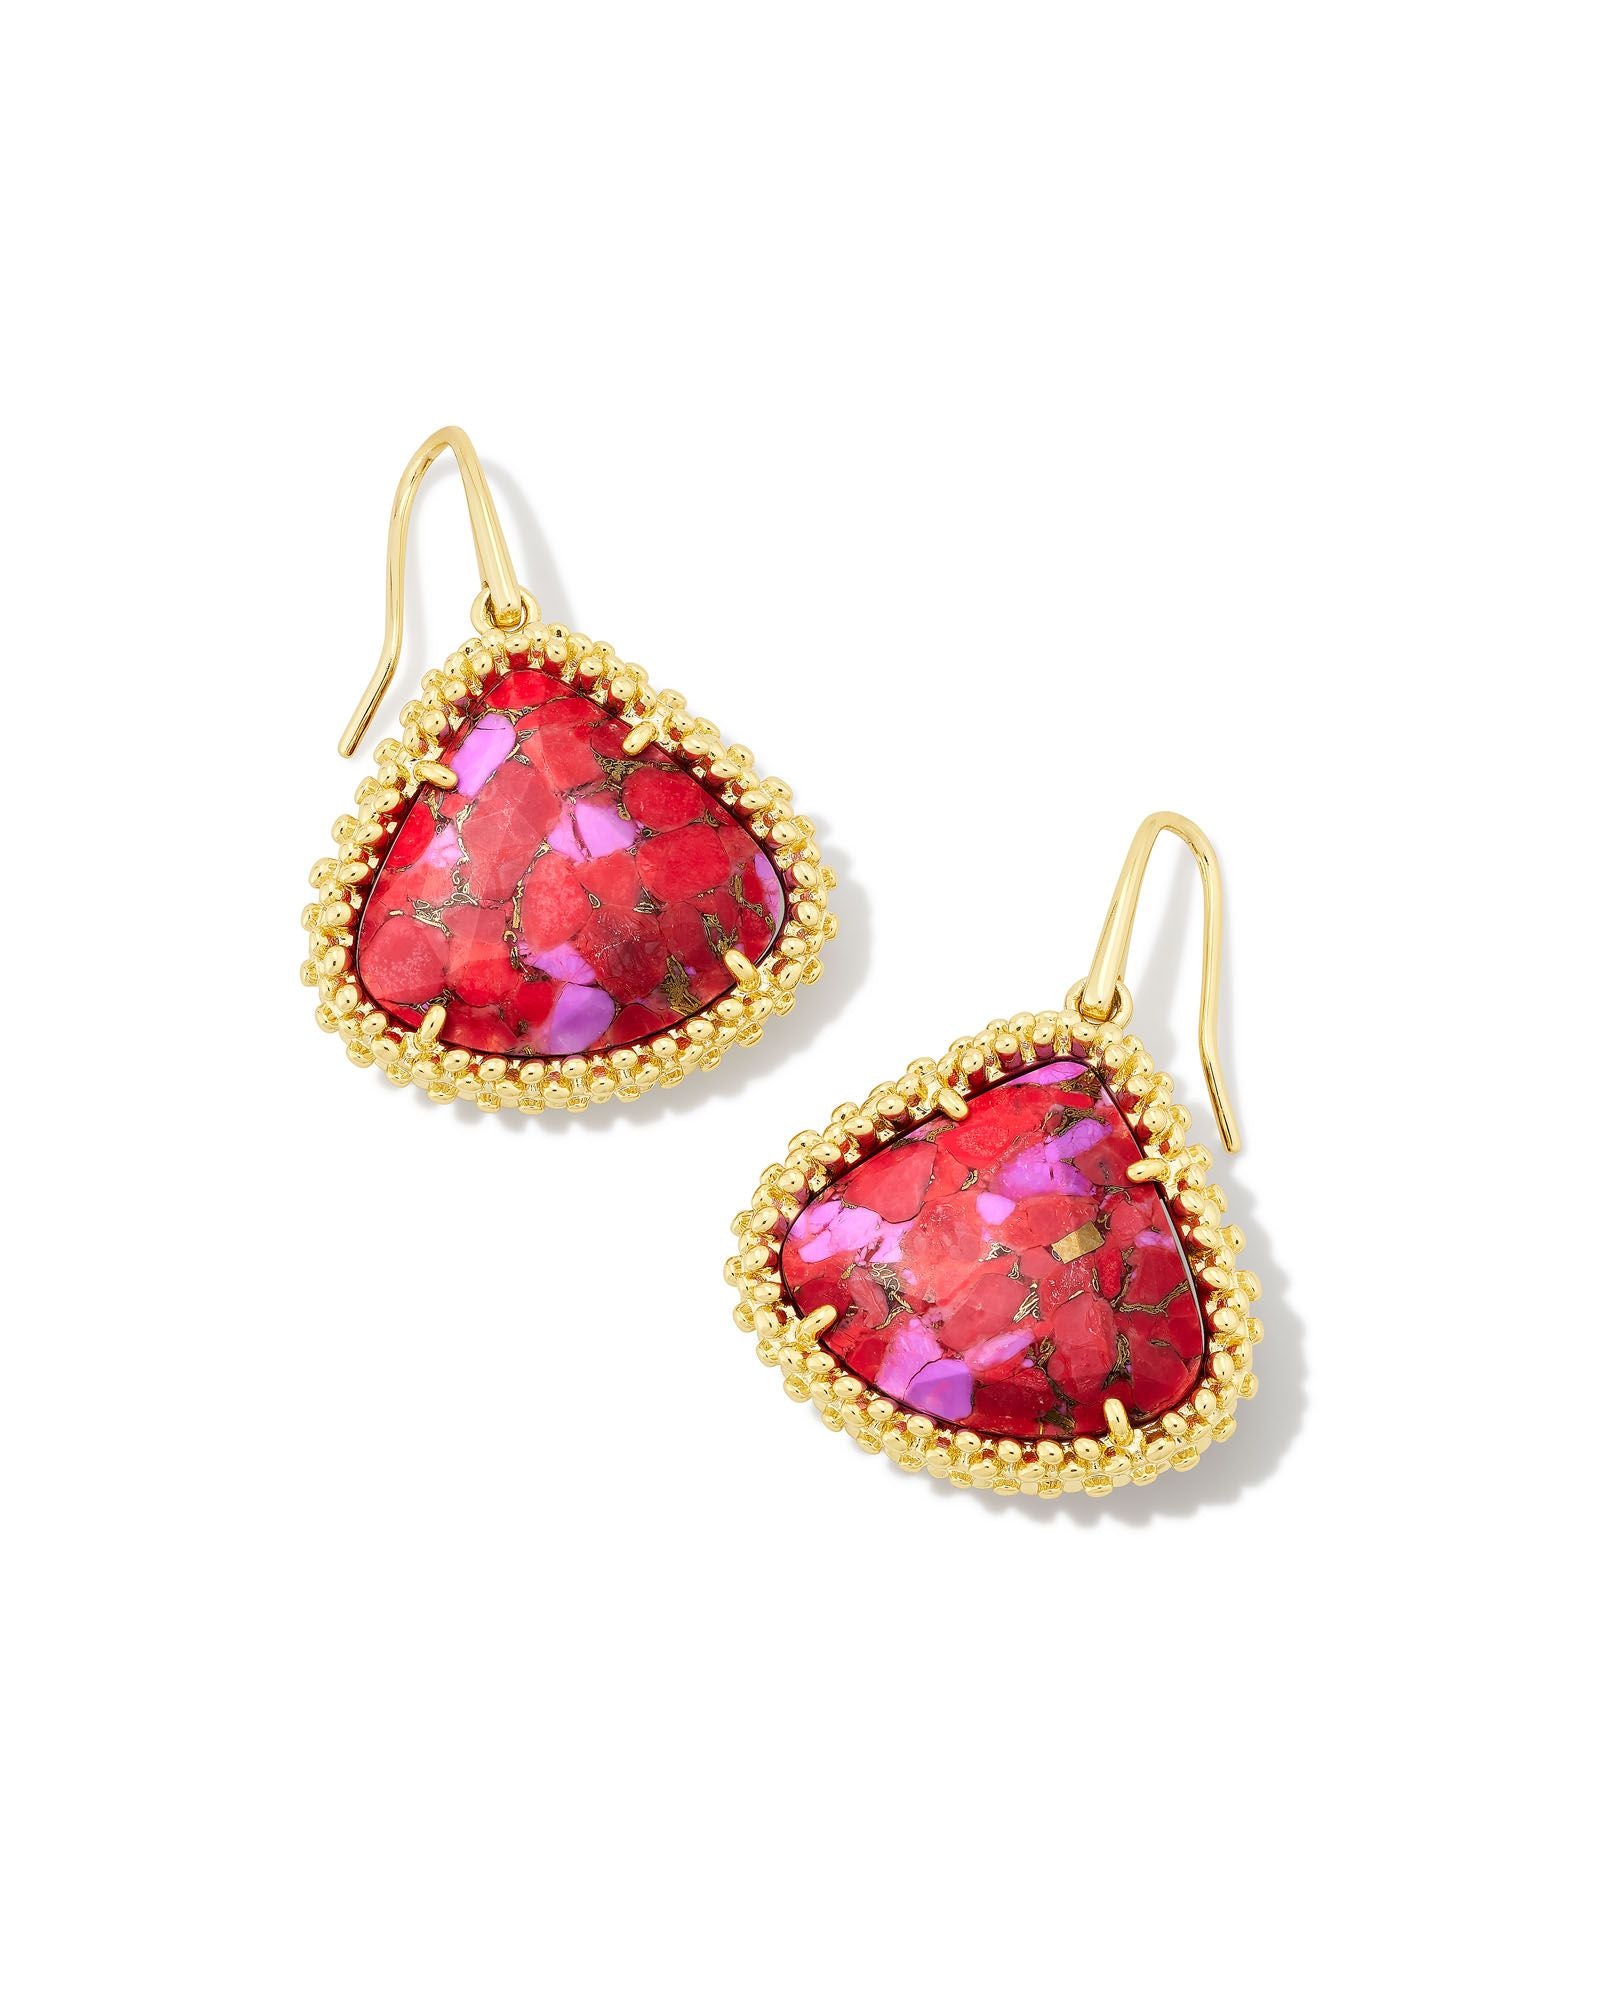 Framed Kendall Large Drop Earring in Gold Bronze Veined Red and Fuchsia Magnesite